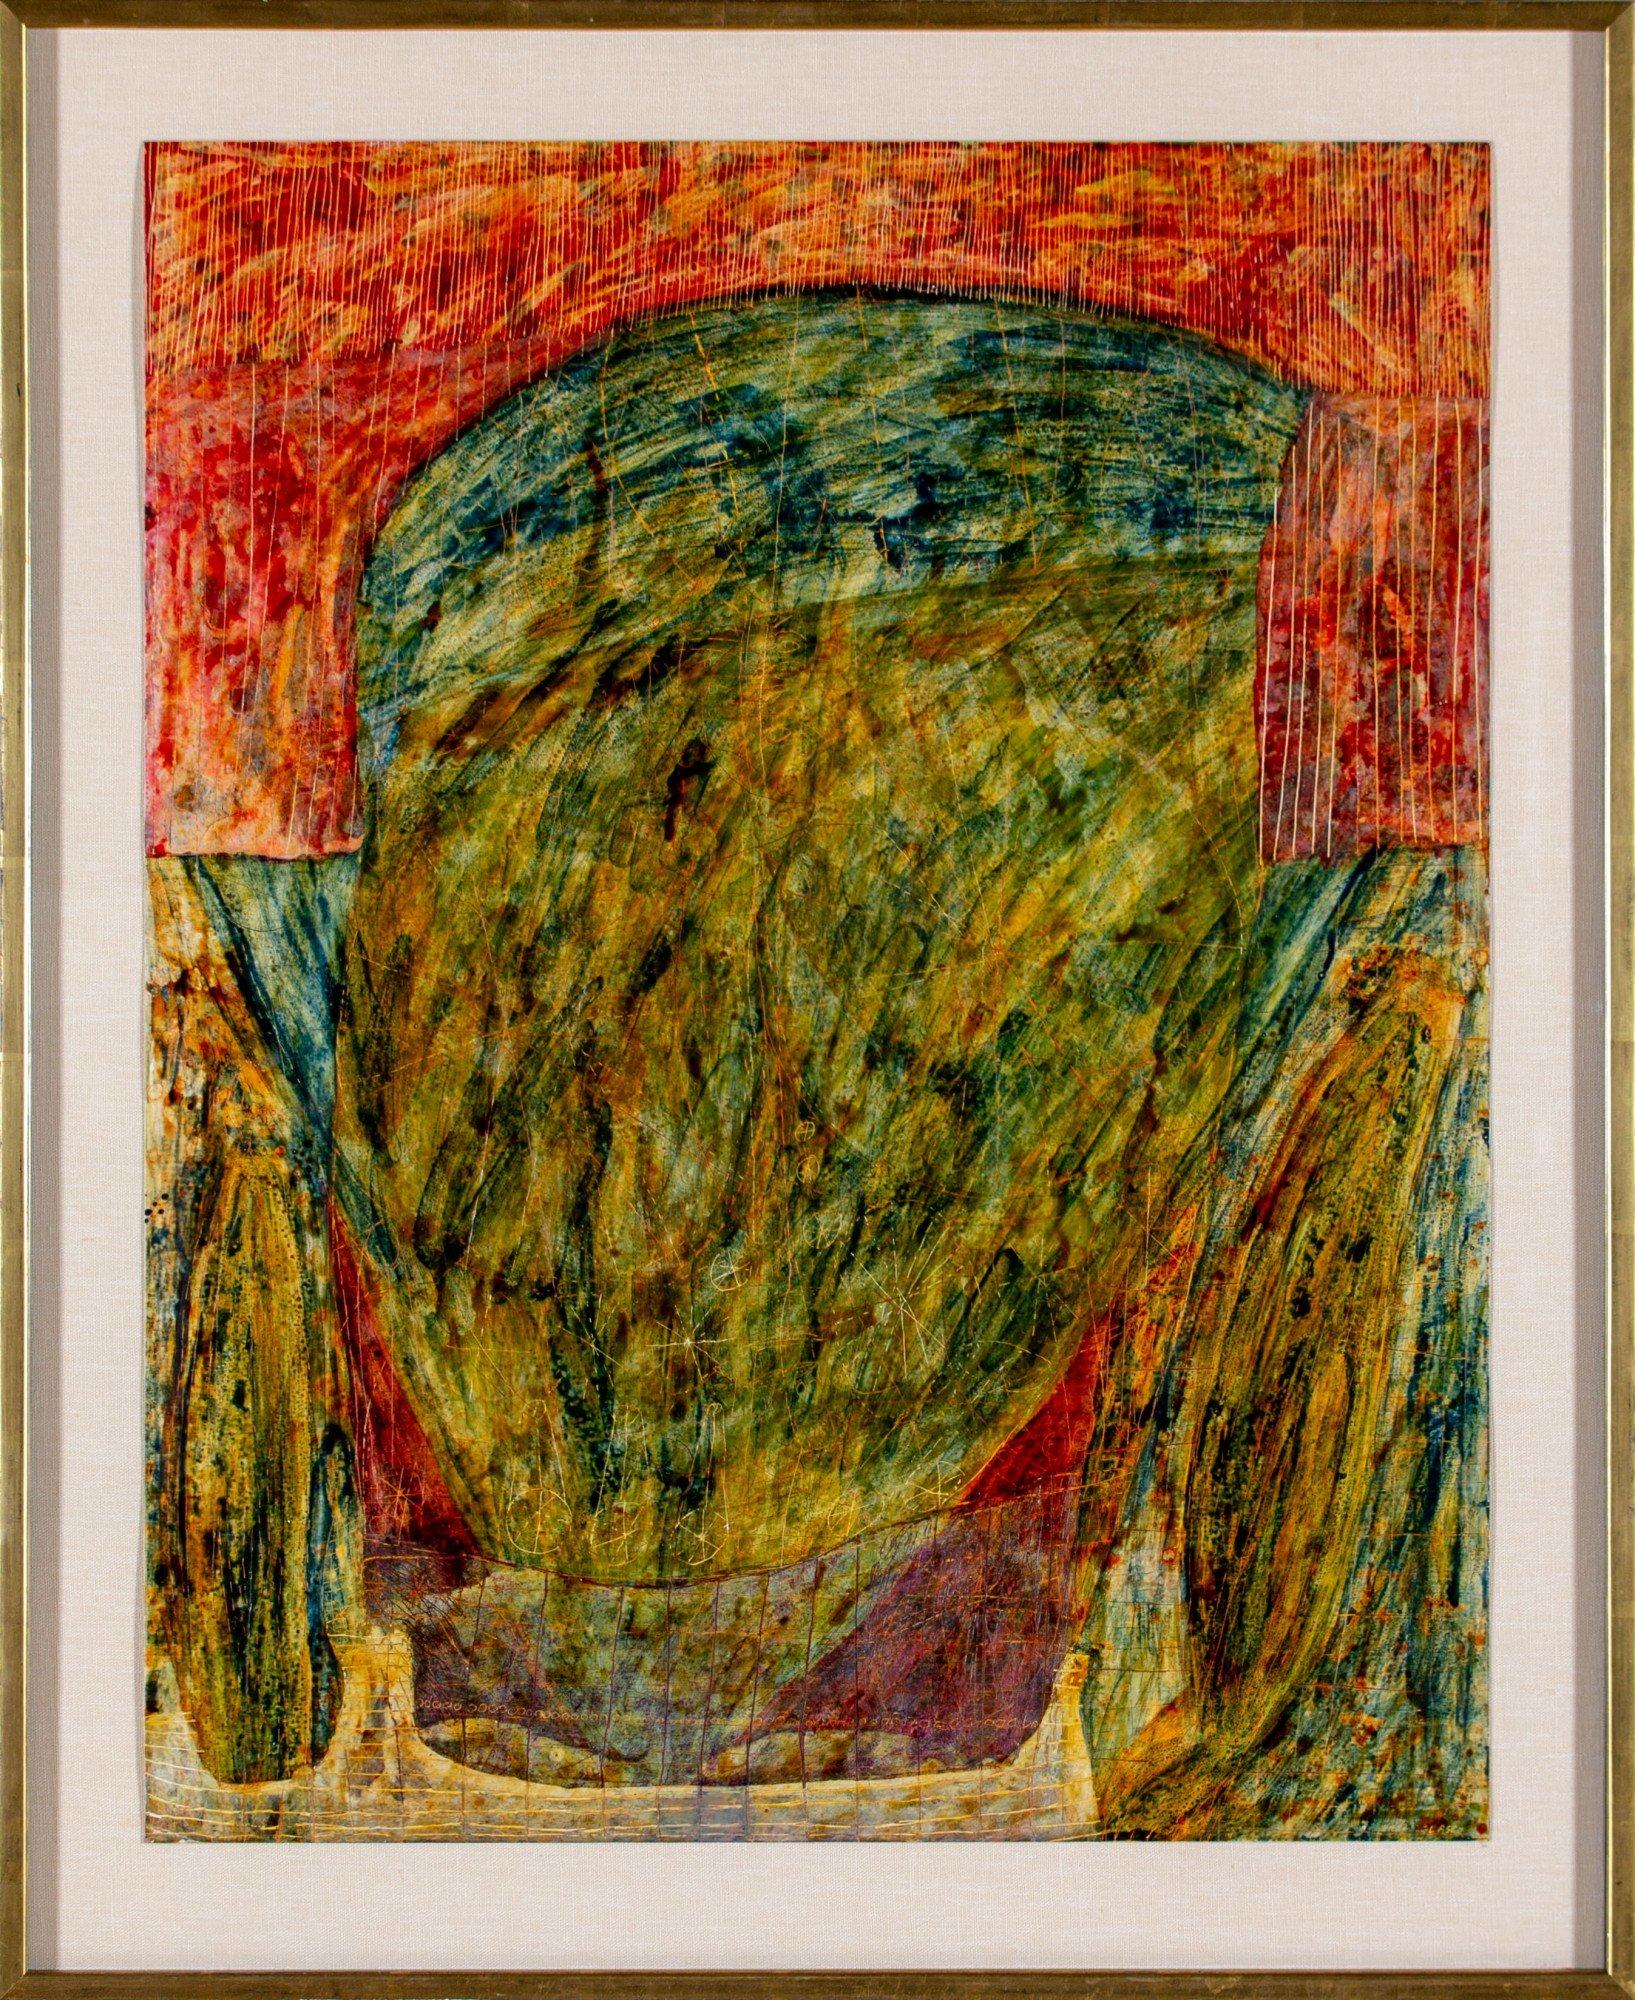 Red & green figural abstract mixed media on paper, 20th century New York artist  - Painting by Joseph Glasco